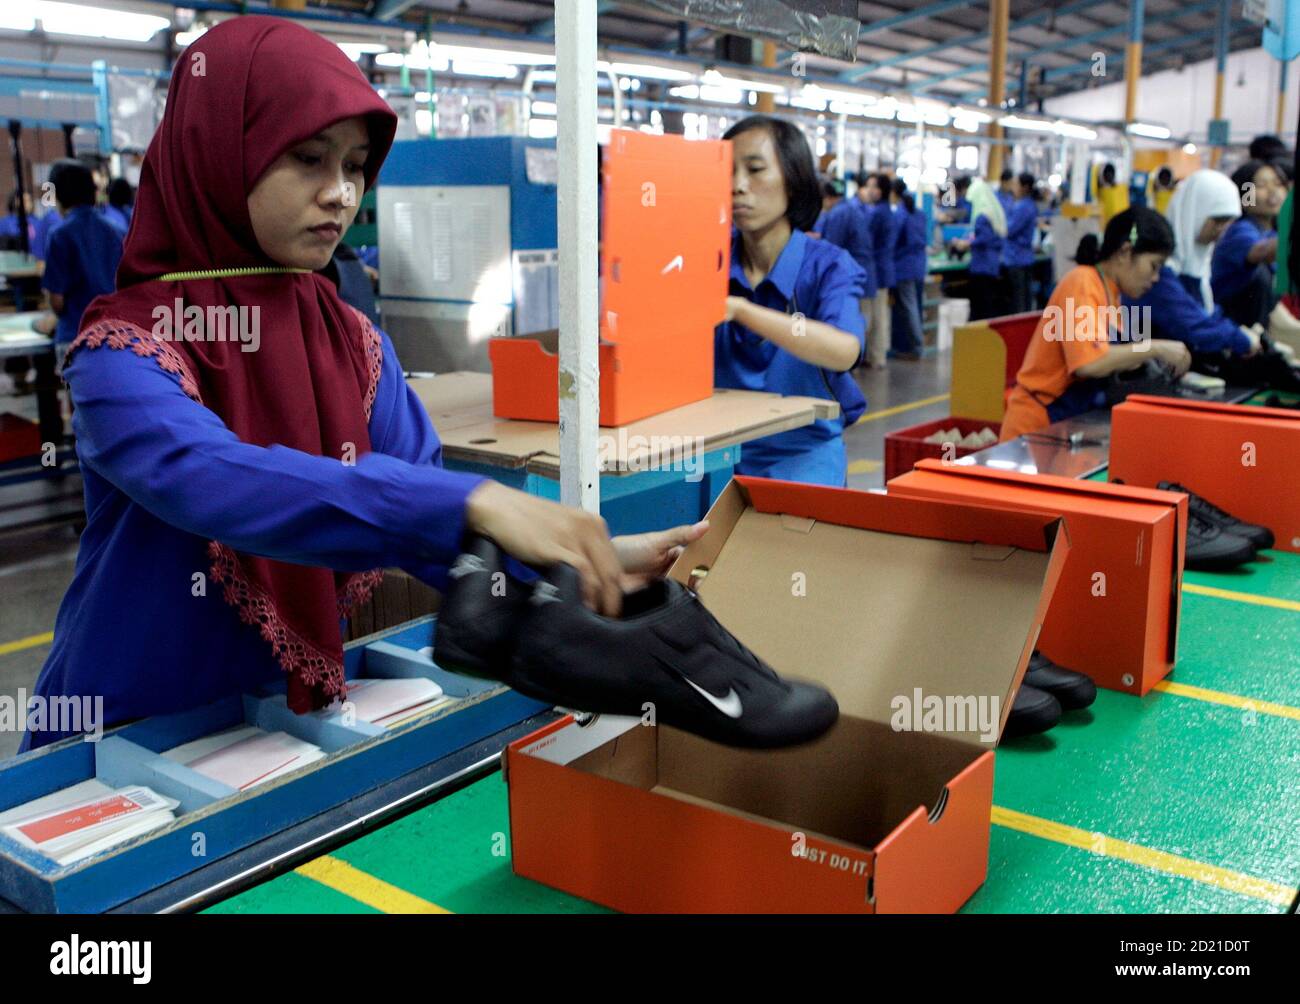 Workers pack at a Nike factory in Tangerang West Java province August 2, 2007. U.S. sportswear maker Nike Inc. has offered to delay severing contracts with two Indonesian shoe firms